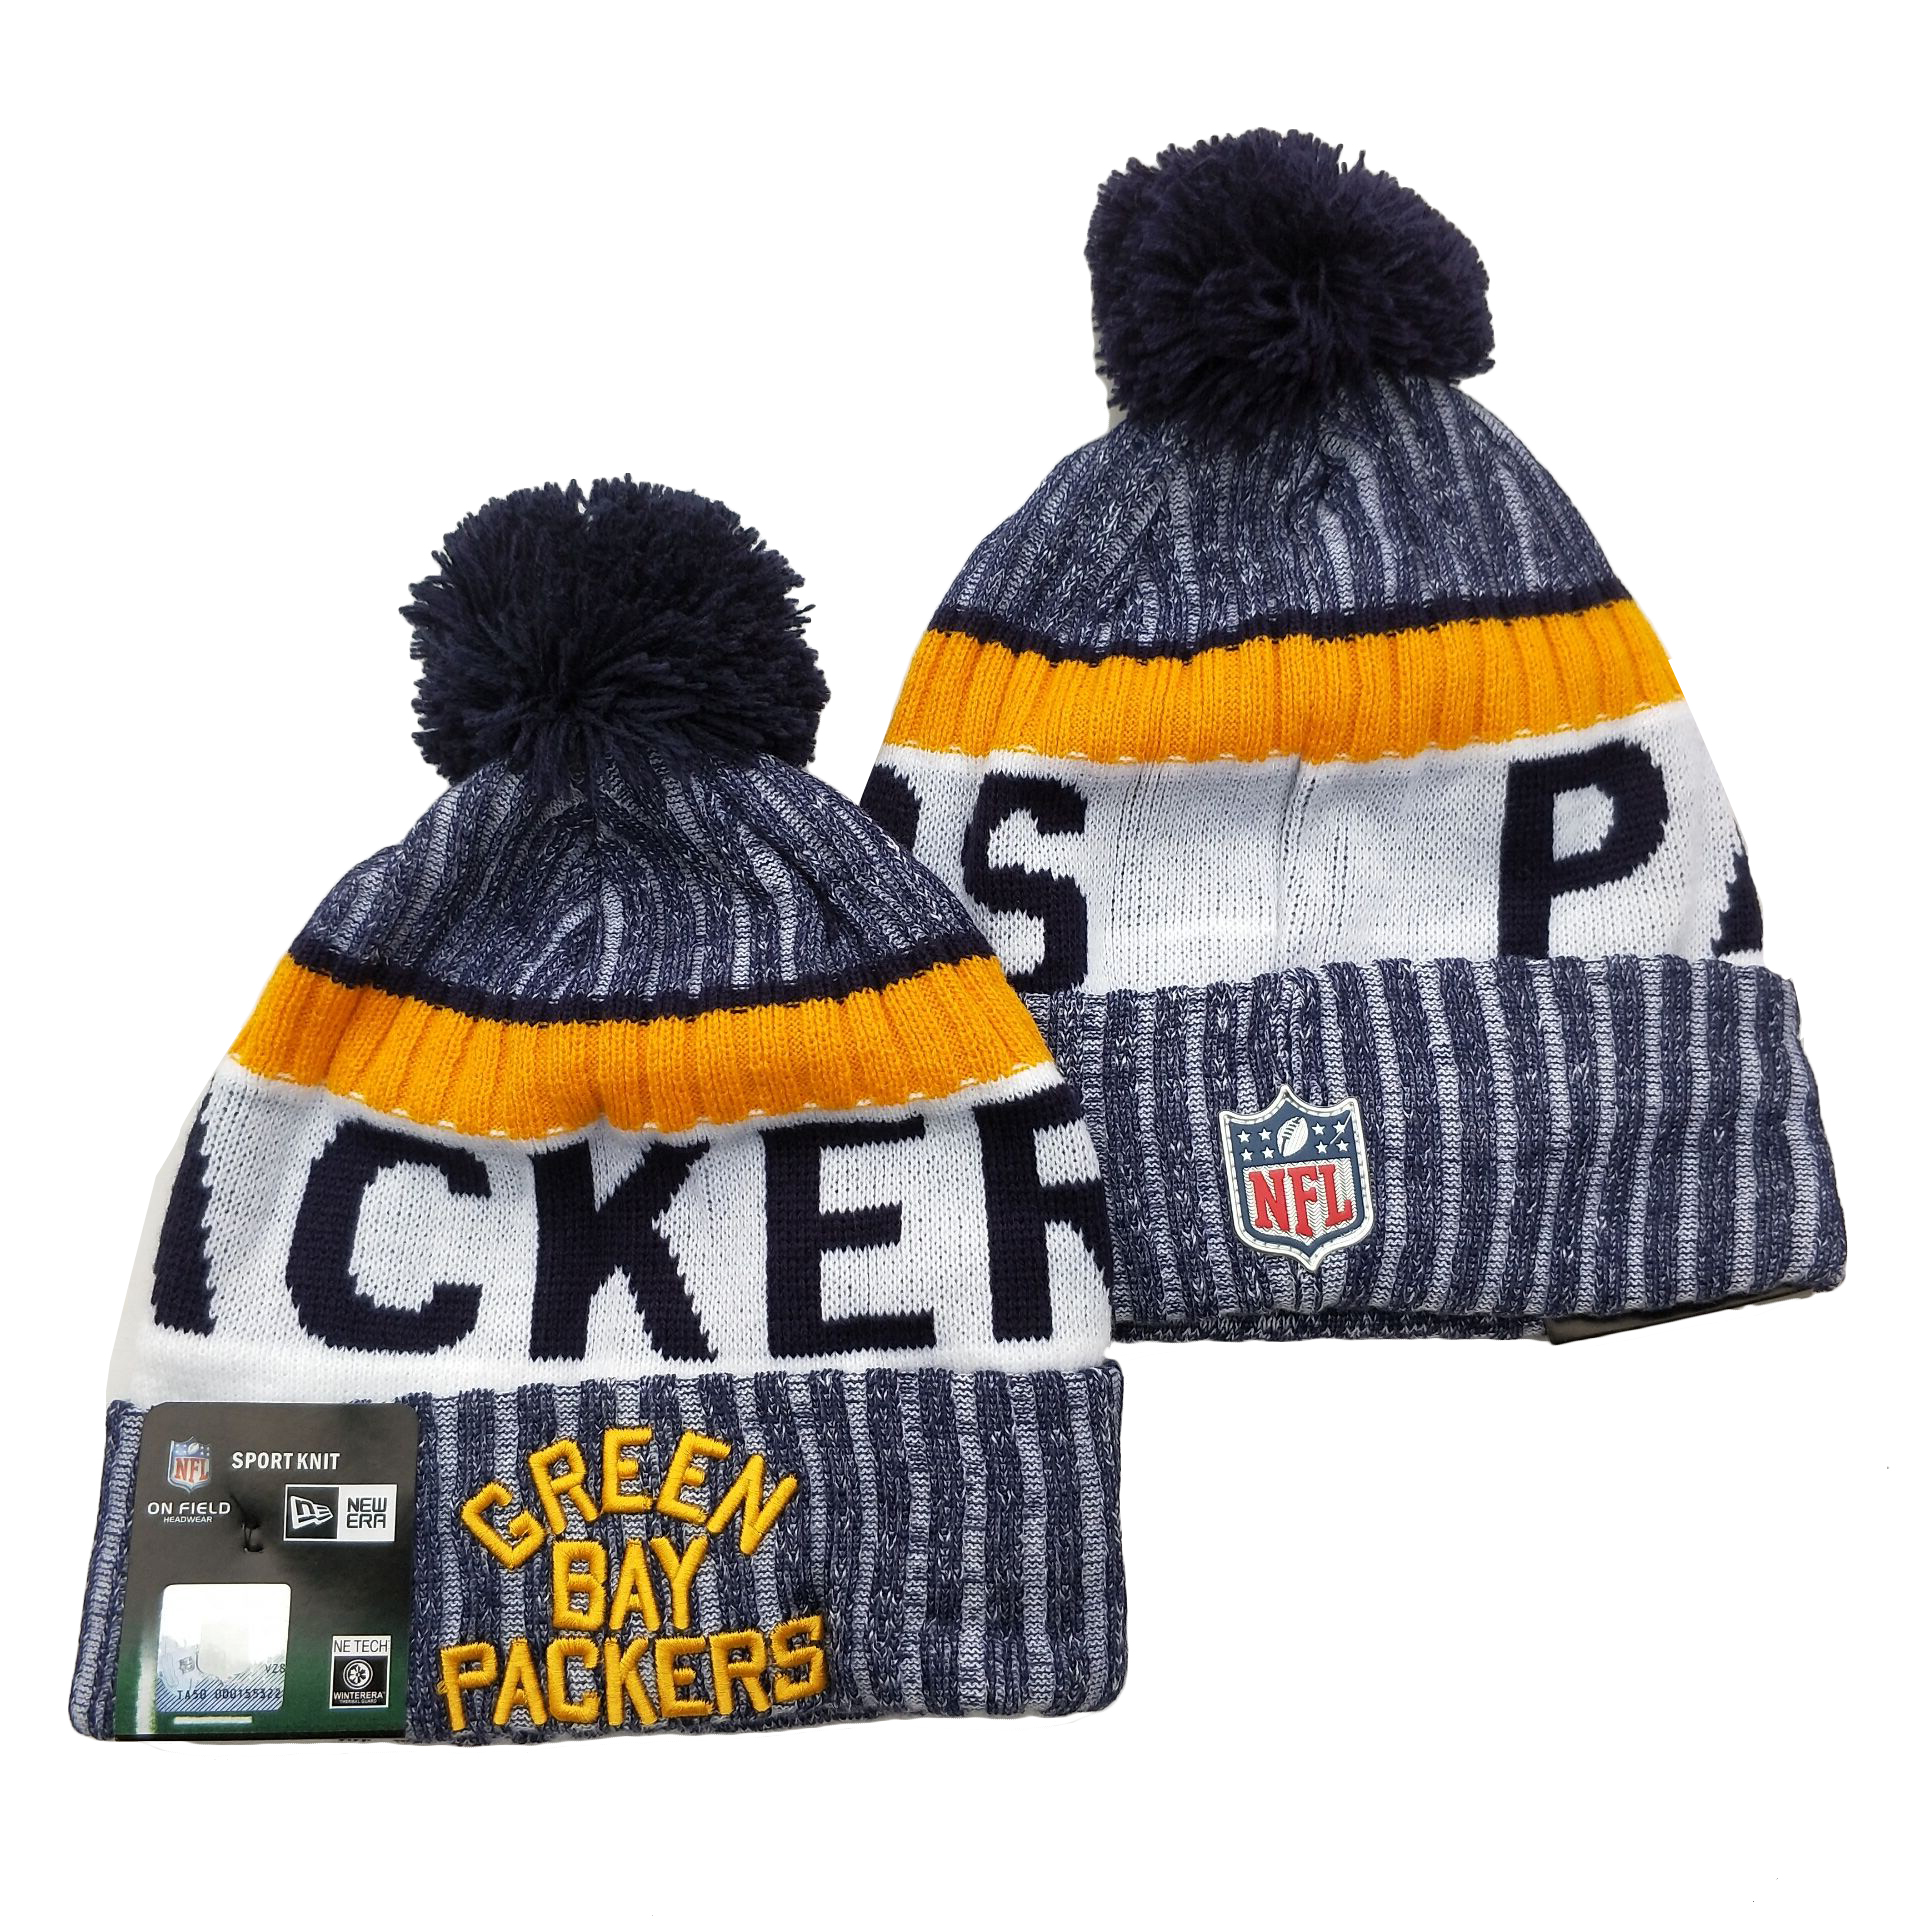 Green Bay Packers knit Hats 082